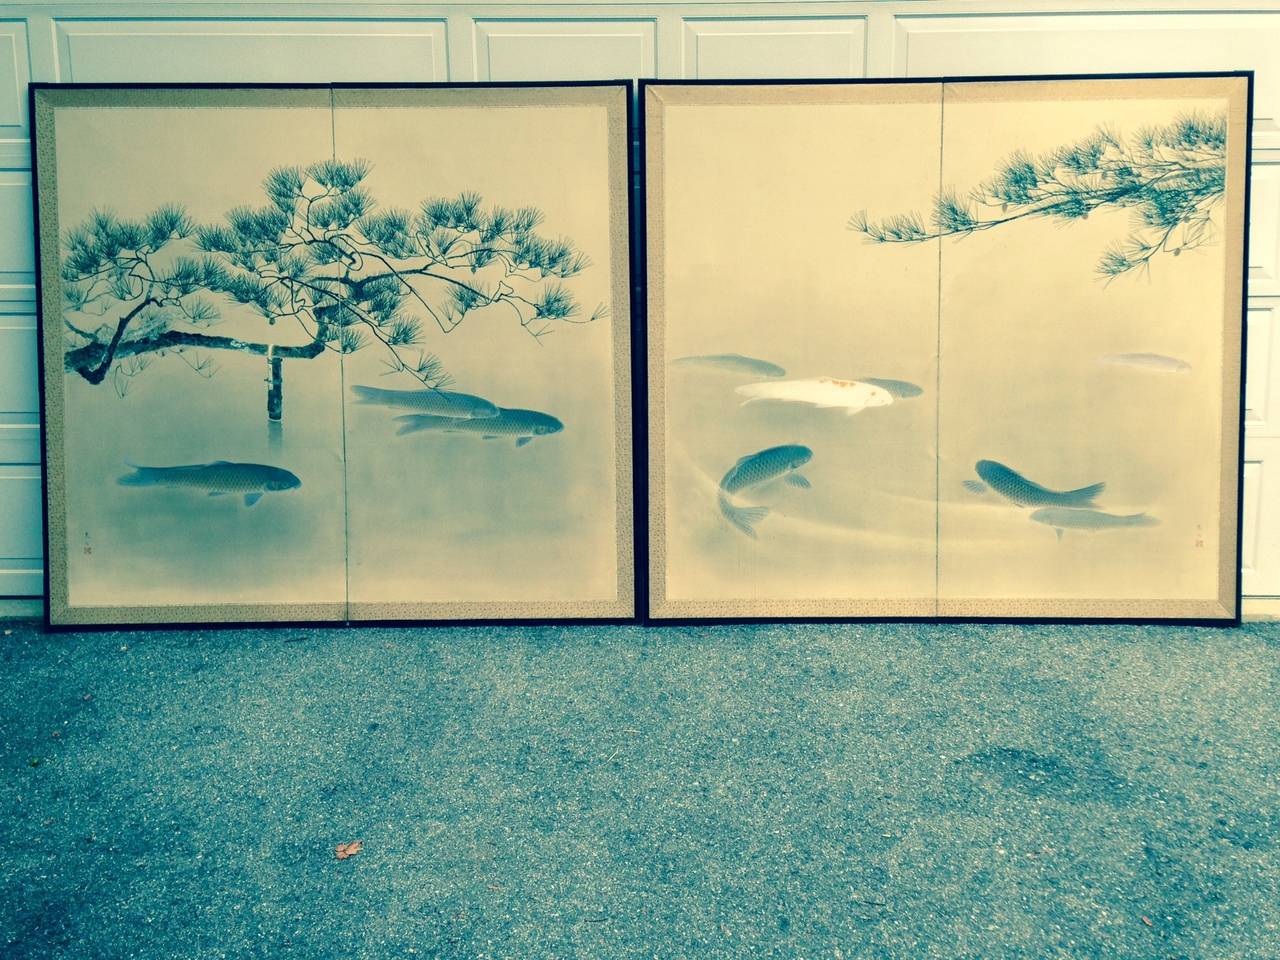 Japan, a pair of two panel screens byobu depicting Koi, ink and mineral colors on paper, each screen 168cm, 67.5” high and 187cm, 75” wide, Taisho to early Showa period, (1920’s-1930’s)

The bi-folded screens featuring prize multi-colored koi